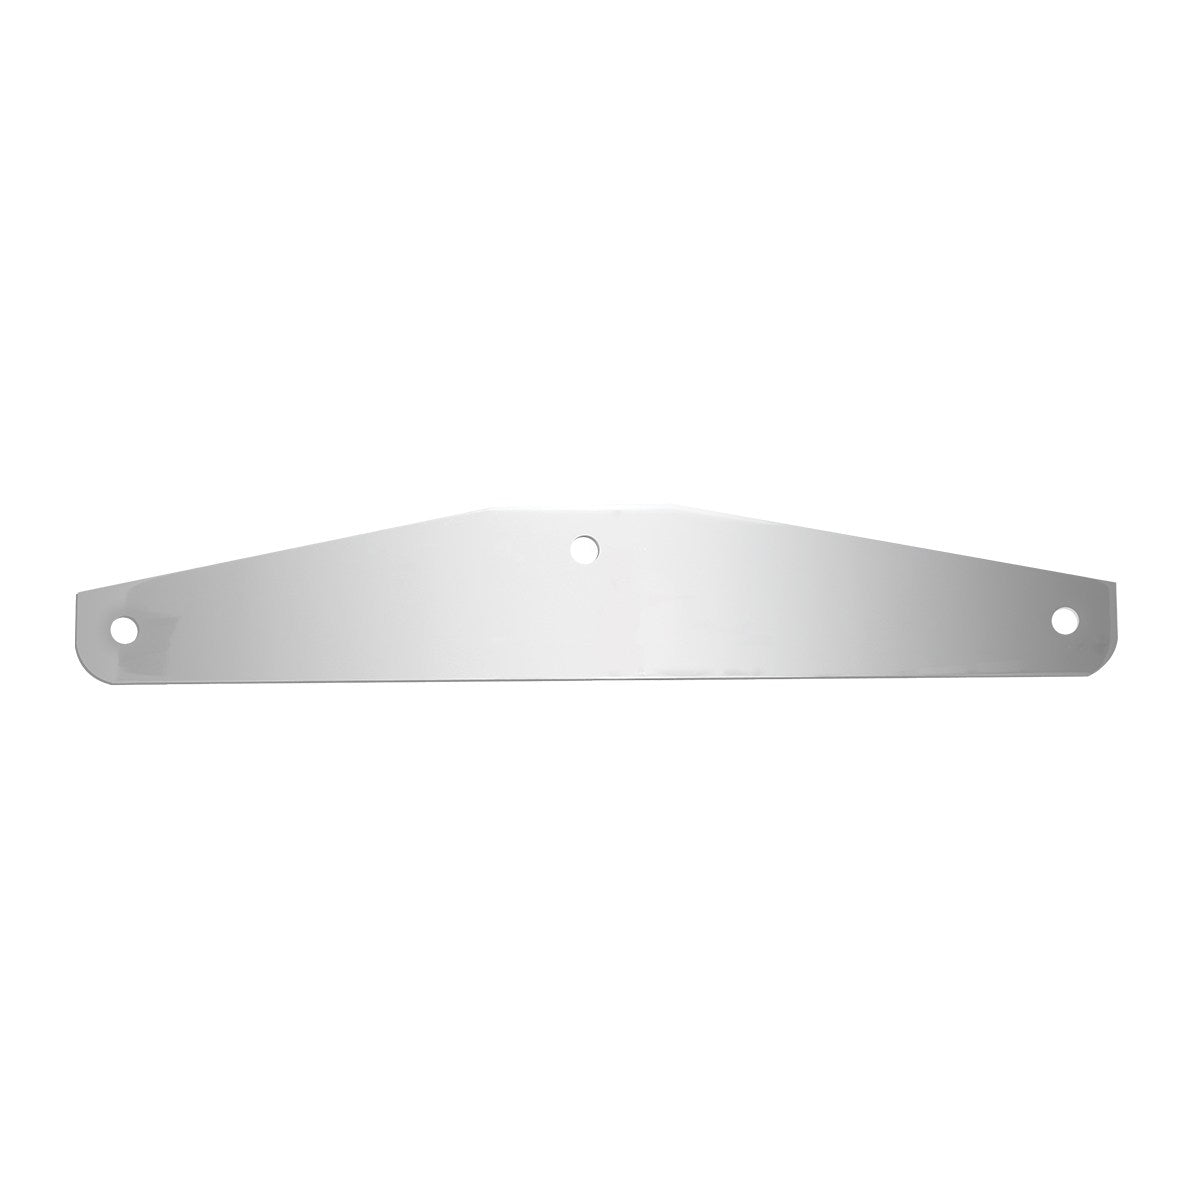 Bottom Chrome Mud Flap Plate With 3 Holes